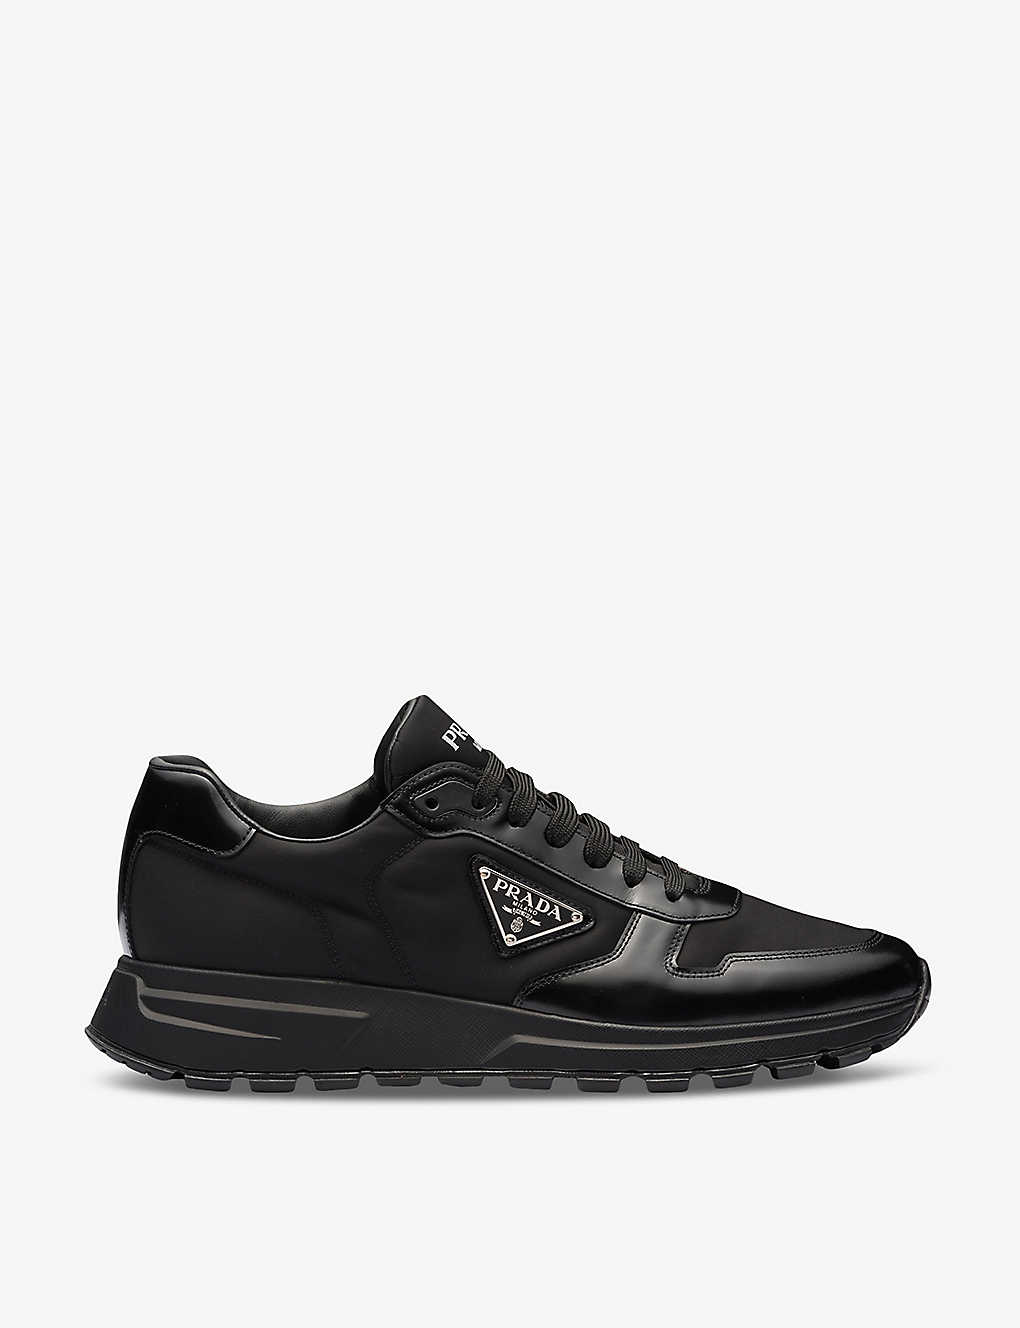 Prada Leather And Re-nylon High-top Sneakers In Black